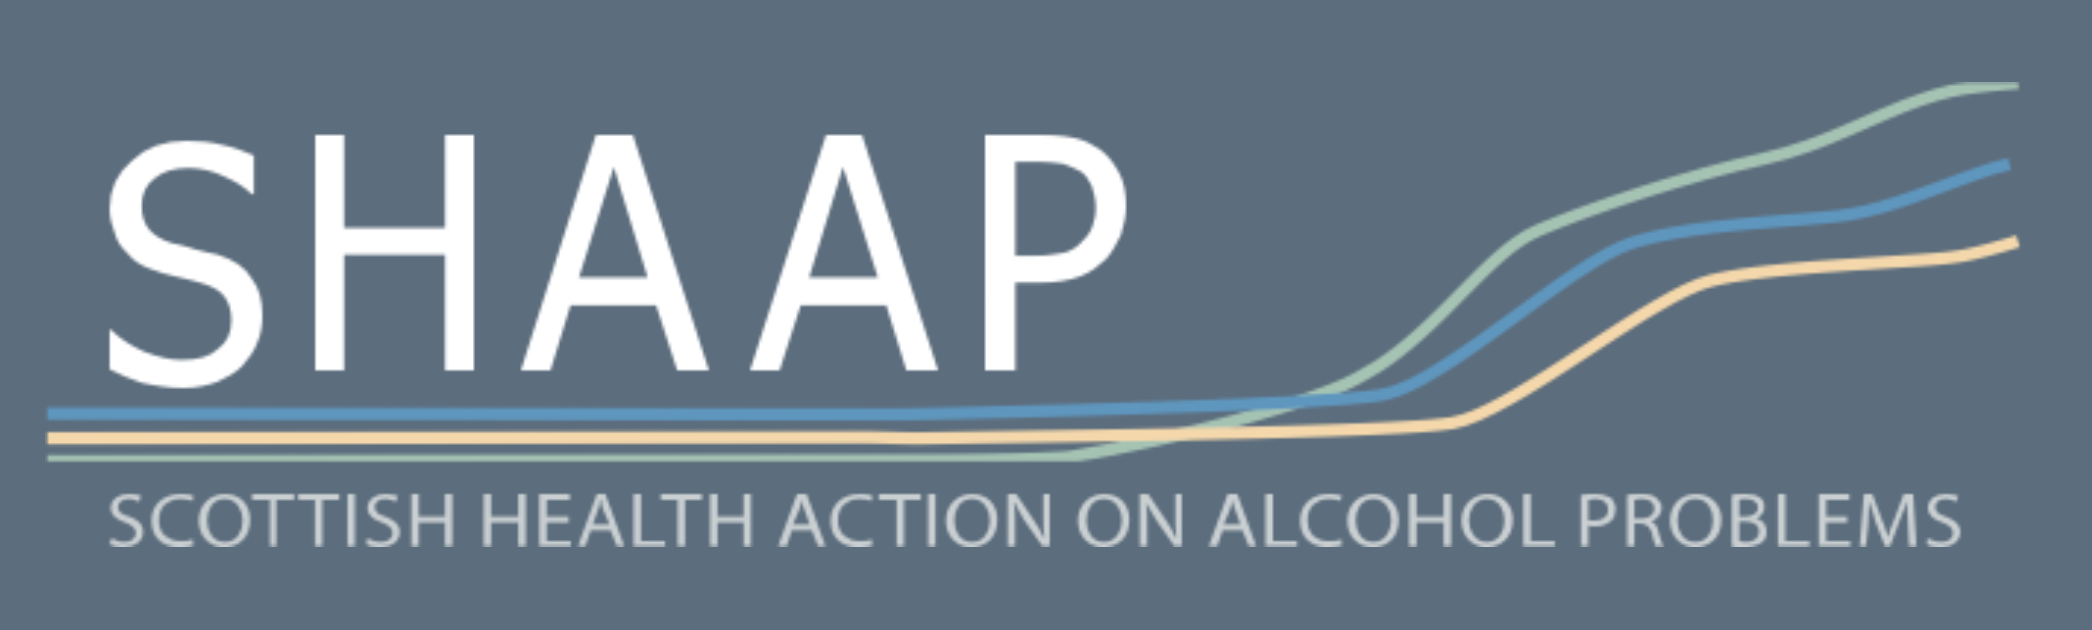 Scottish Health Action on Alcohol Problems